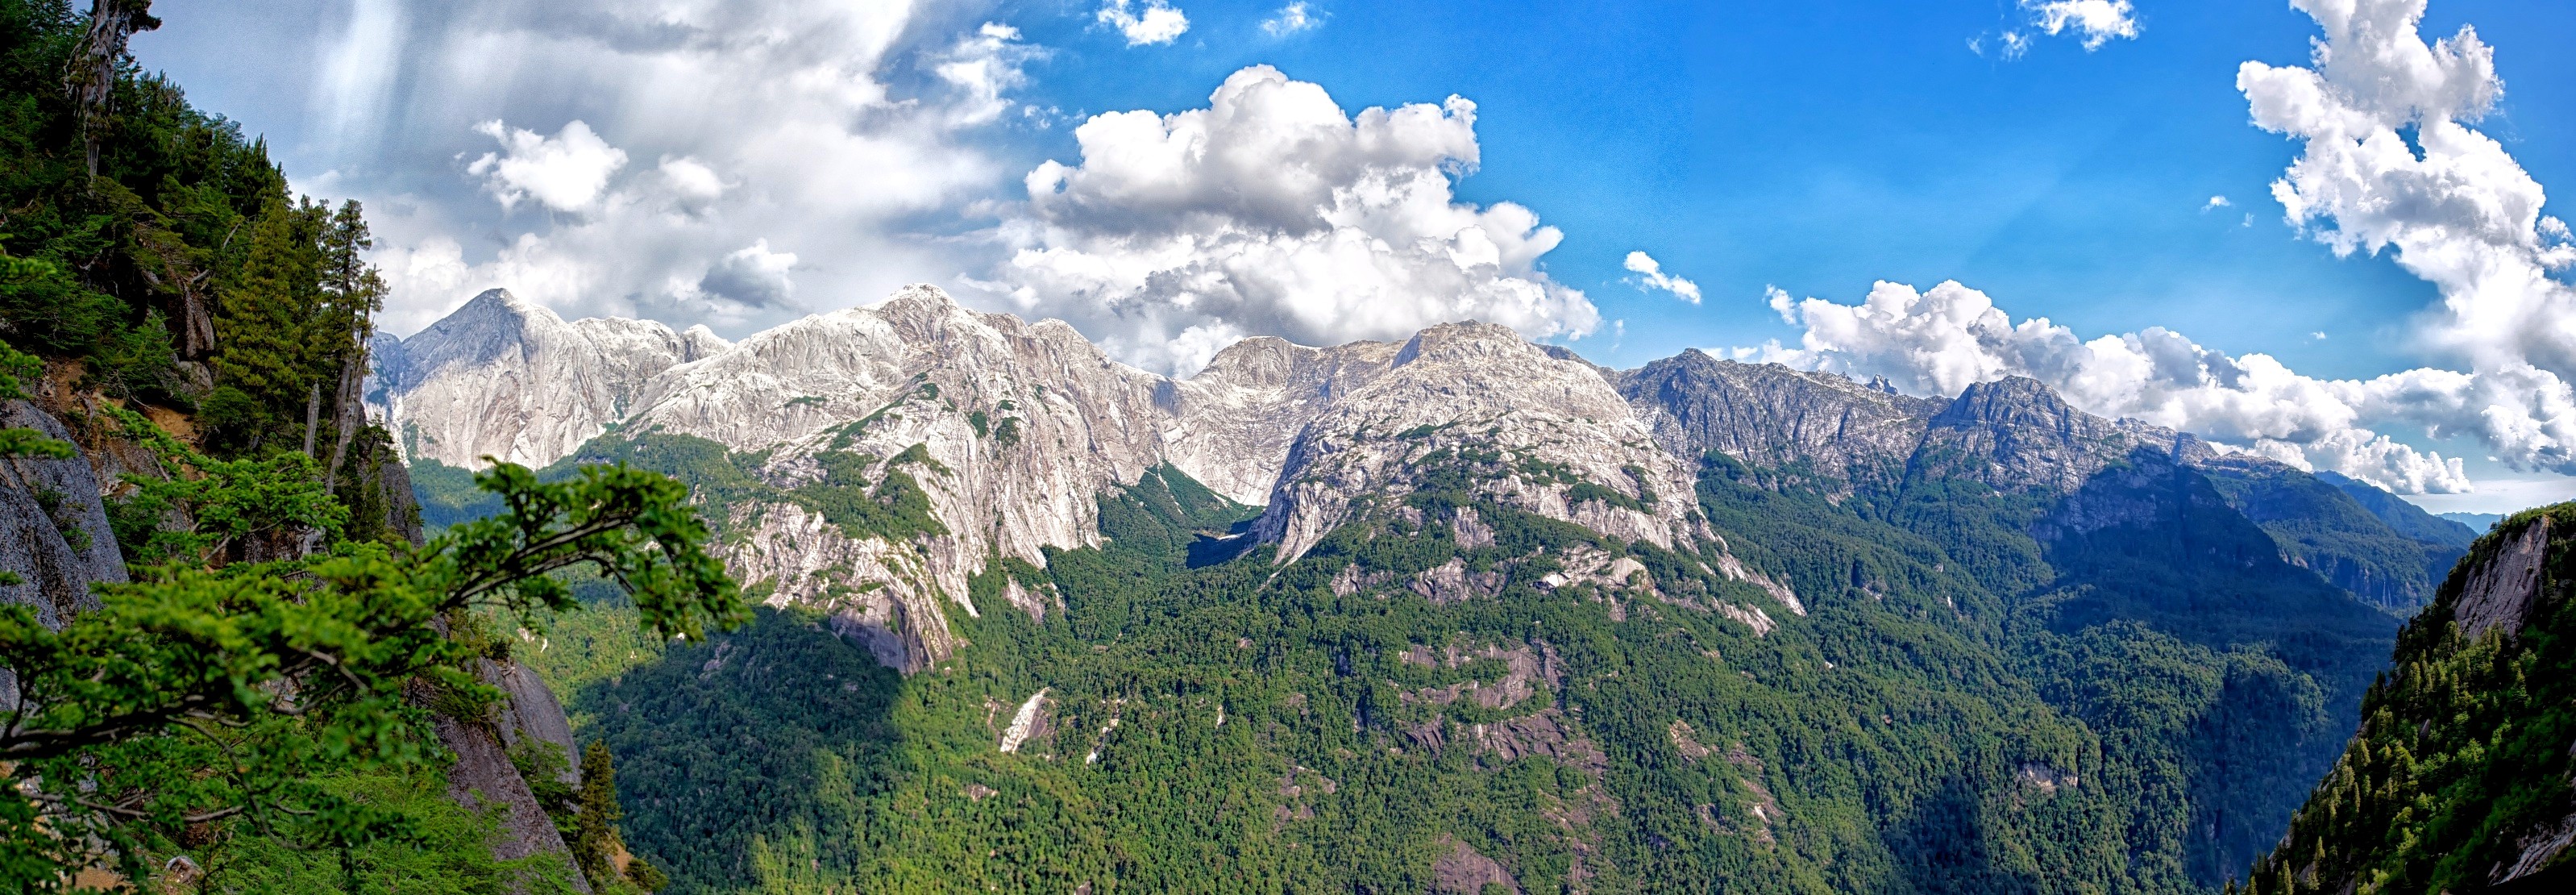 Mountains Panoramas Forest Clouds Chile Valley Cliff Summer Nature Landscape 3196x1110